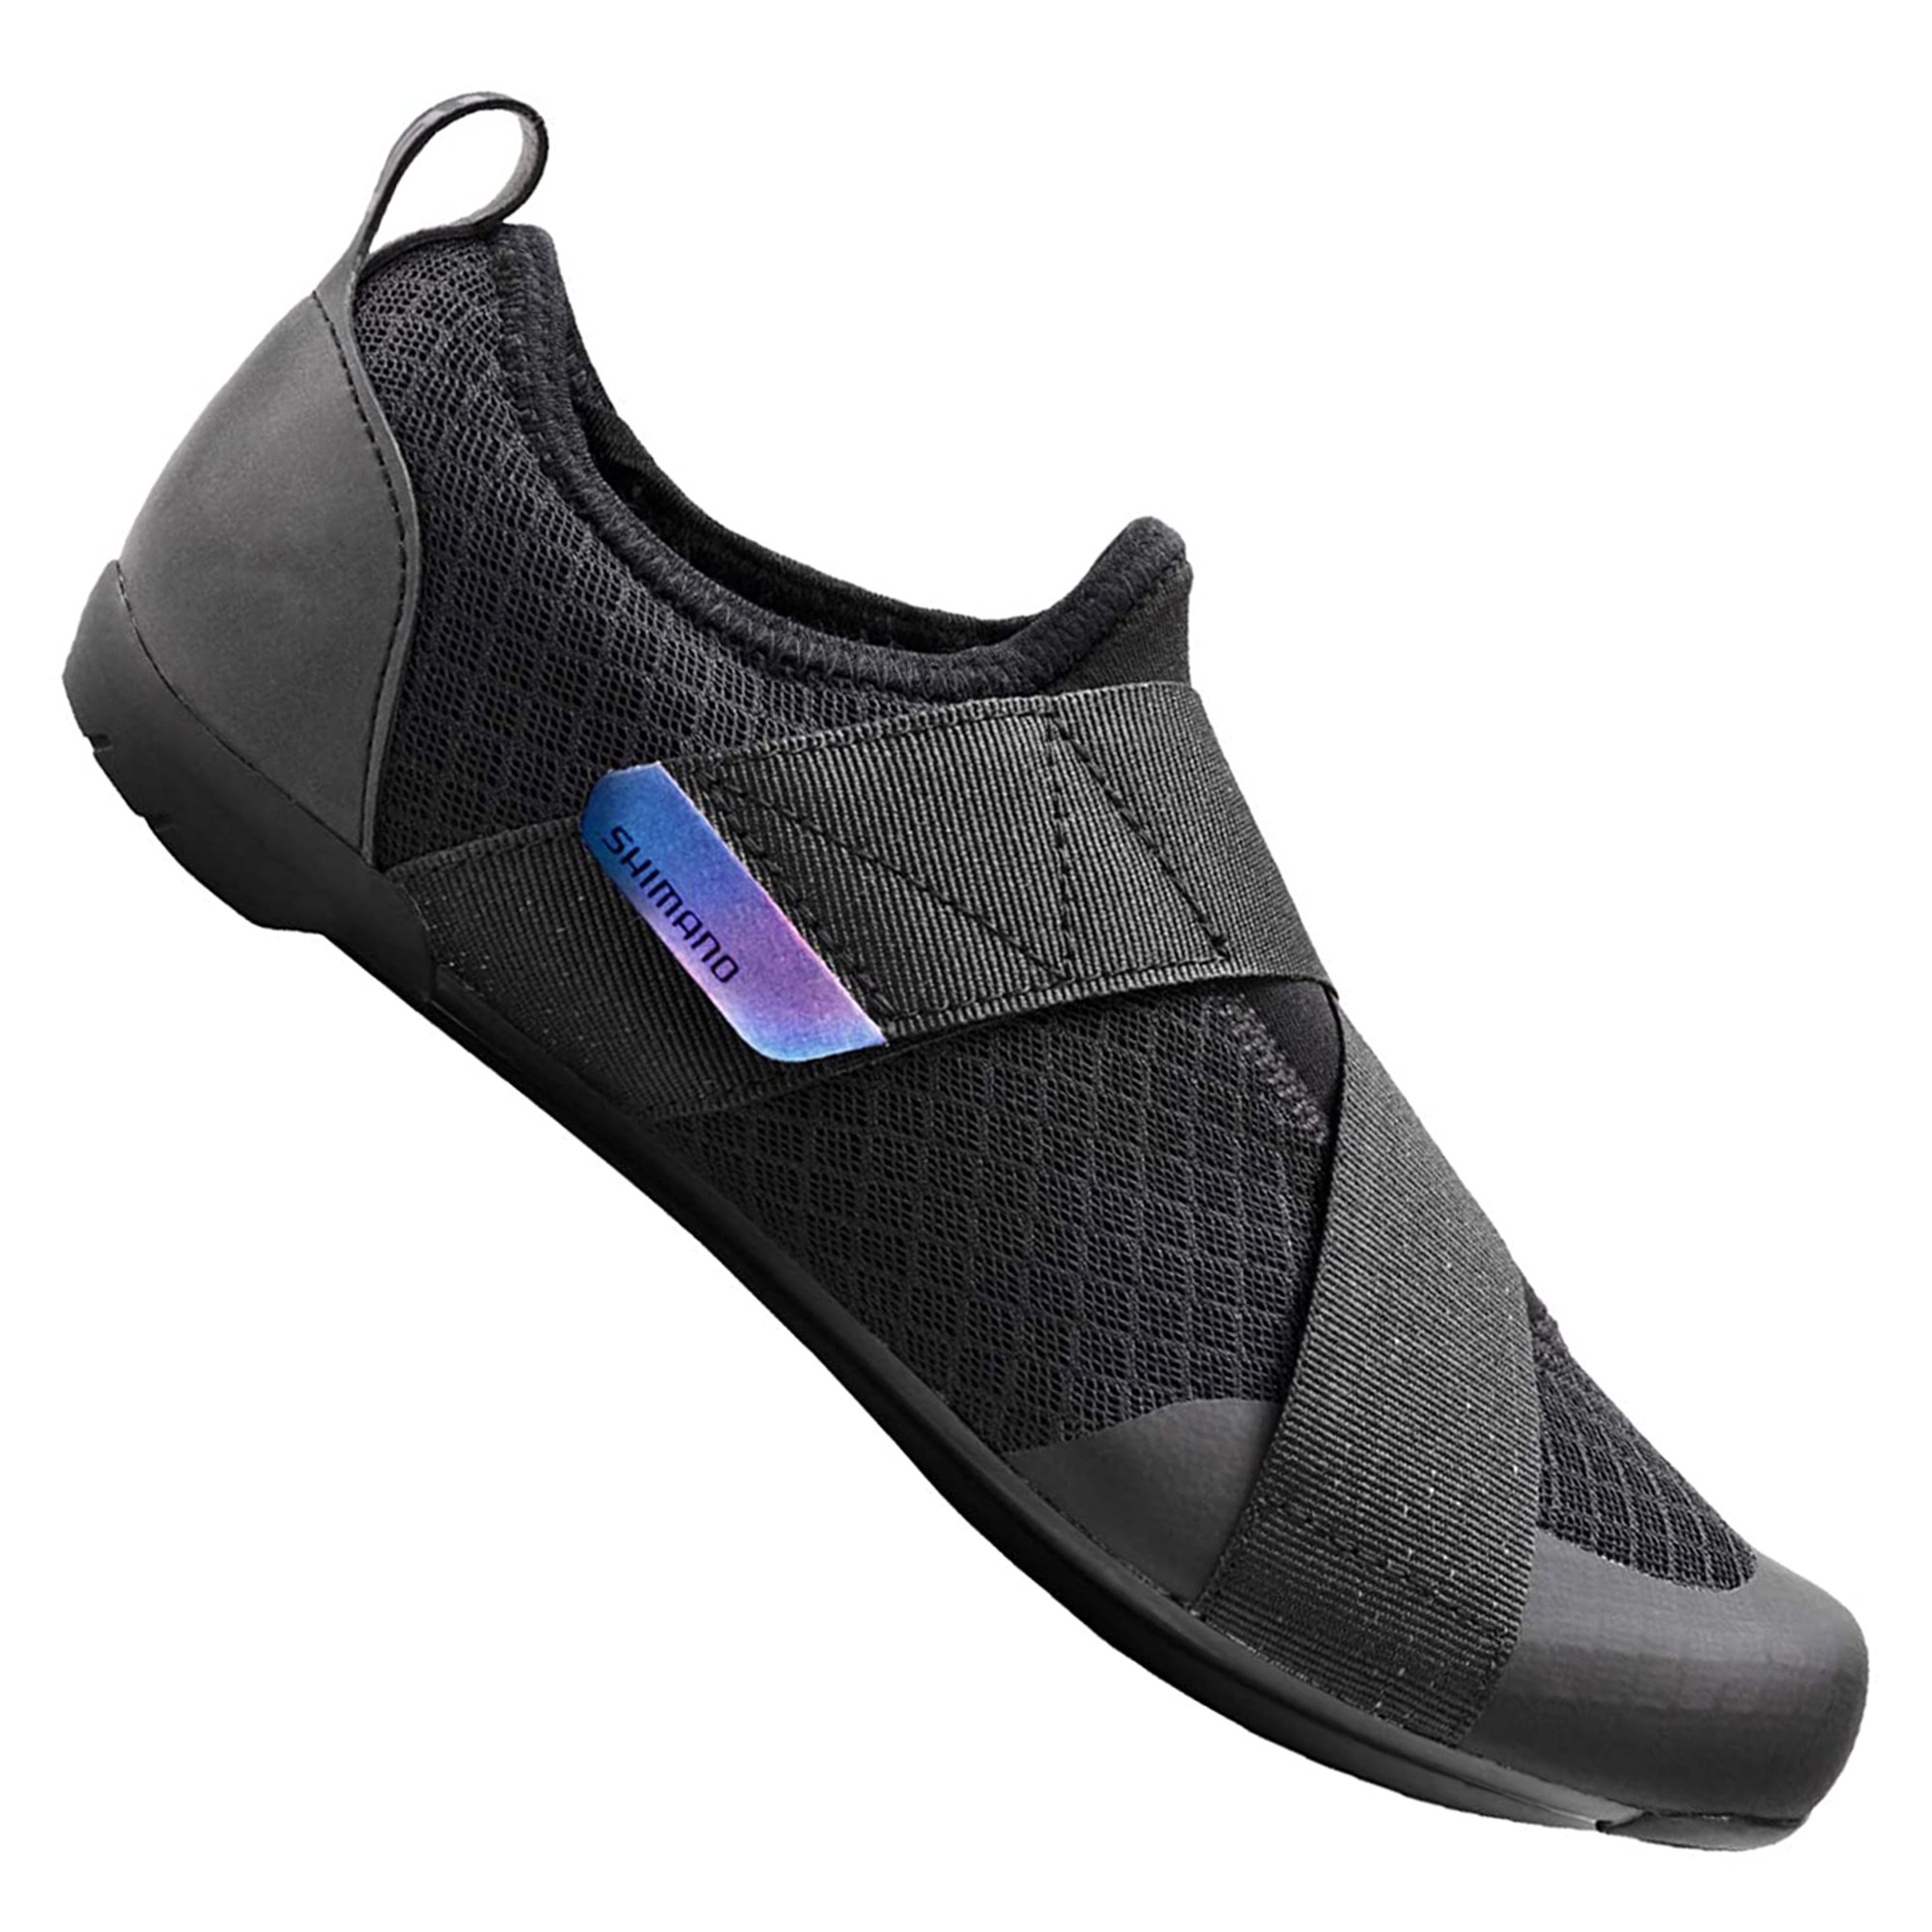 Shimano IC100 Women Road Bike Bicycle Cycling Shoes Black - Compatible with SPD SPD-SL Delta - Size 40